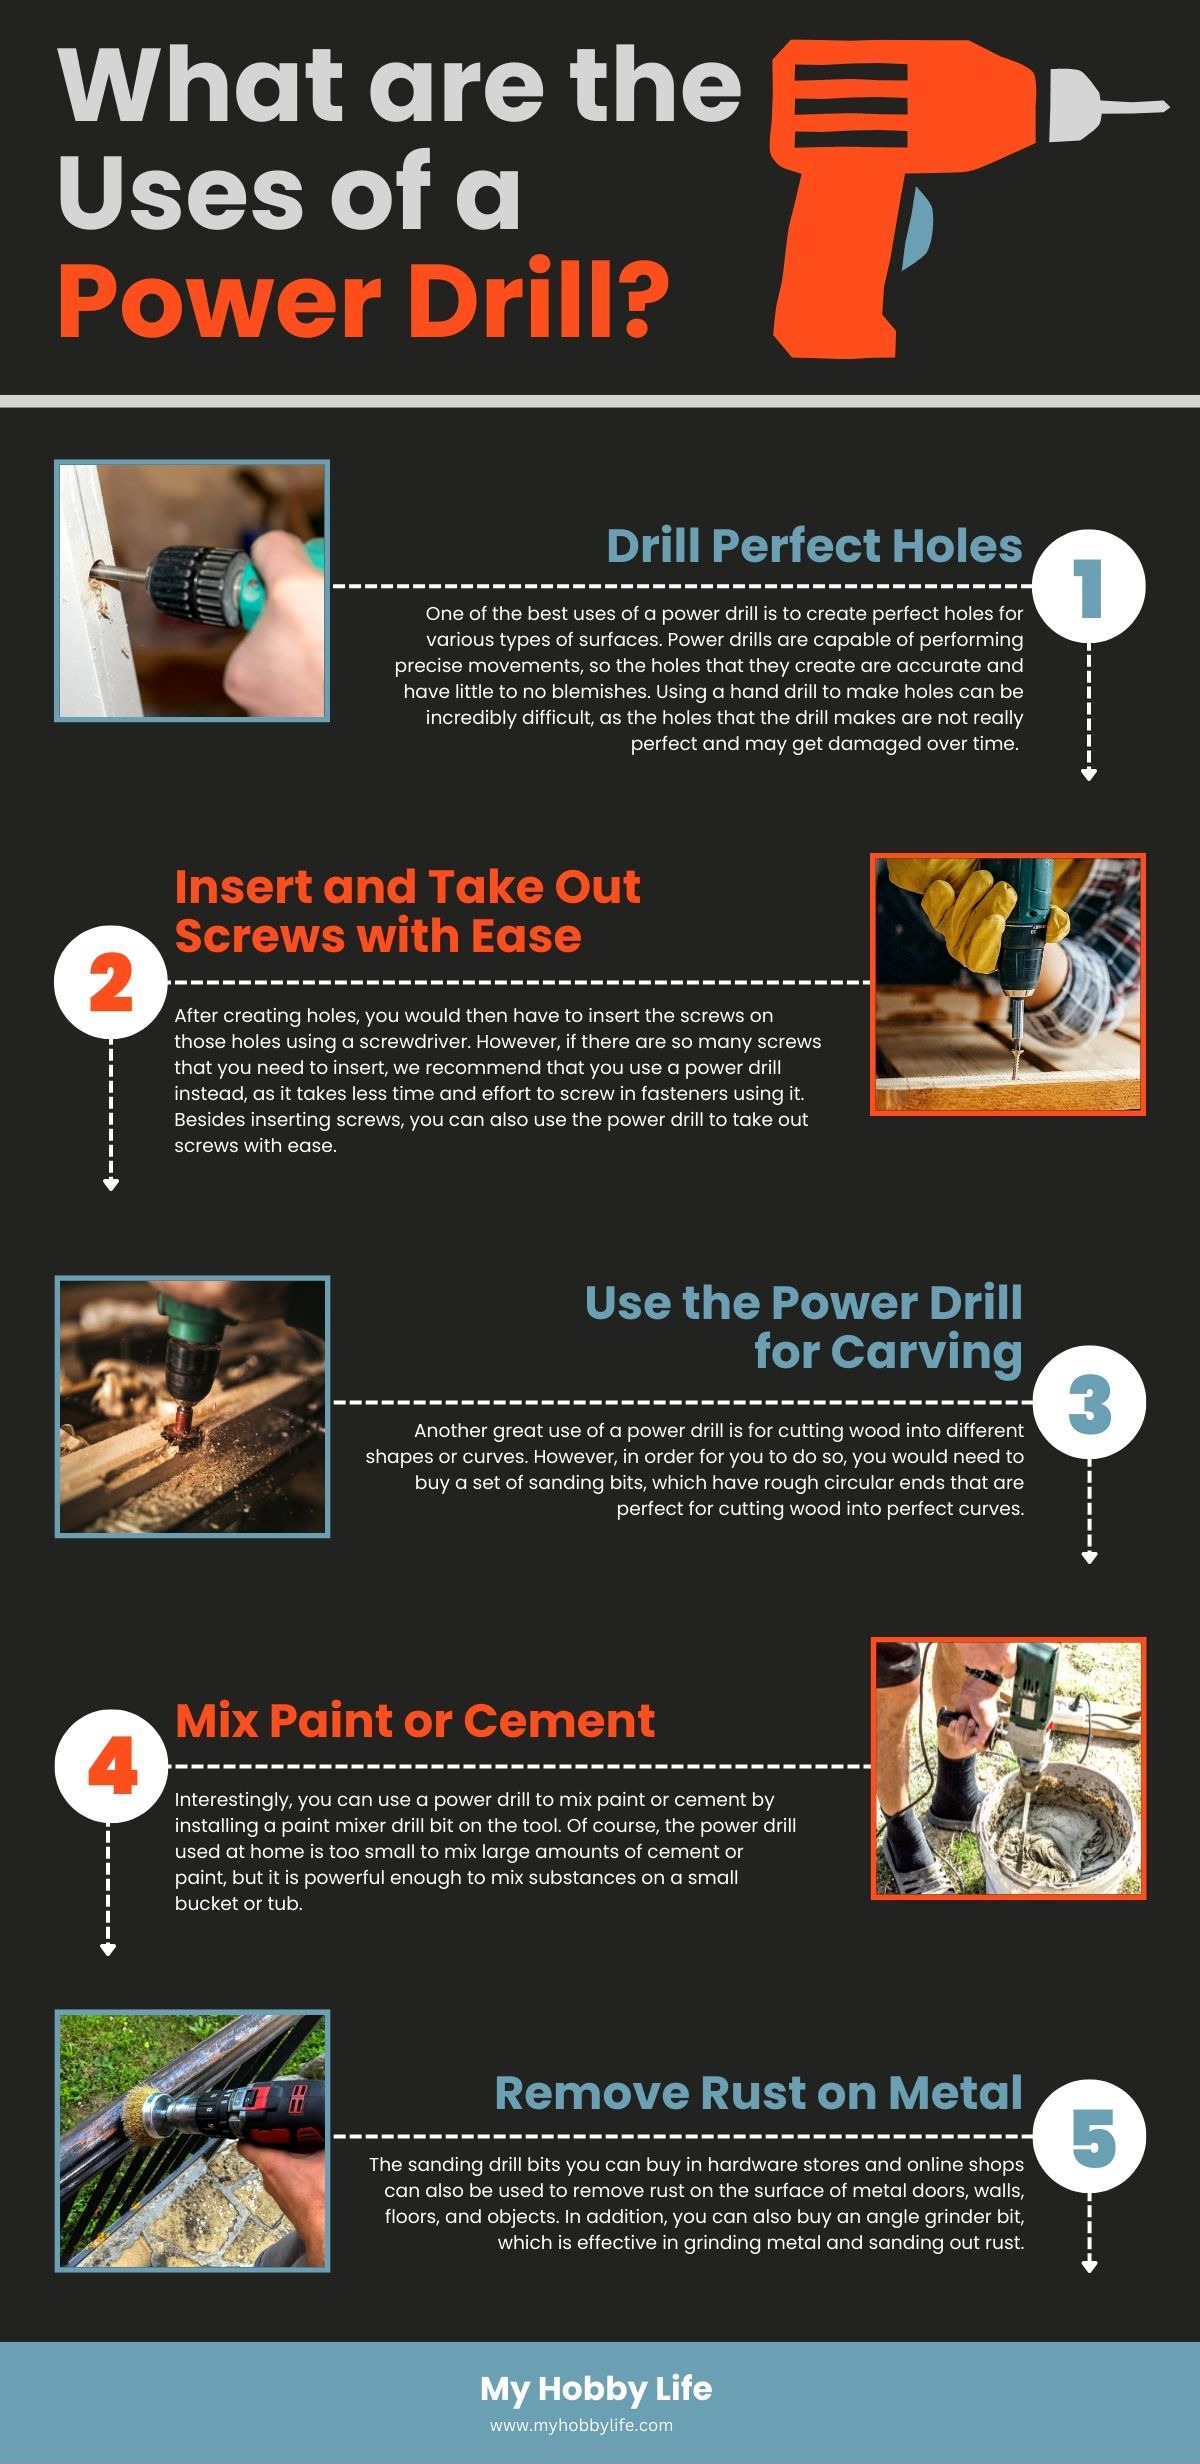 What are the Different Types of Power Drills?